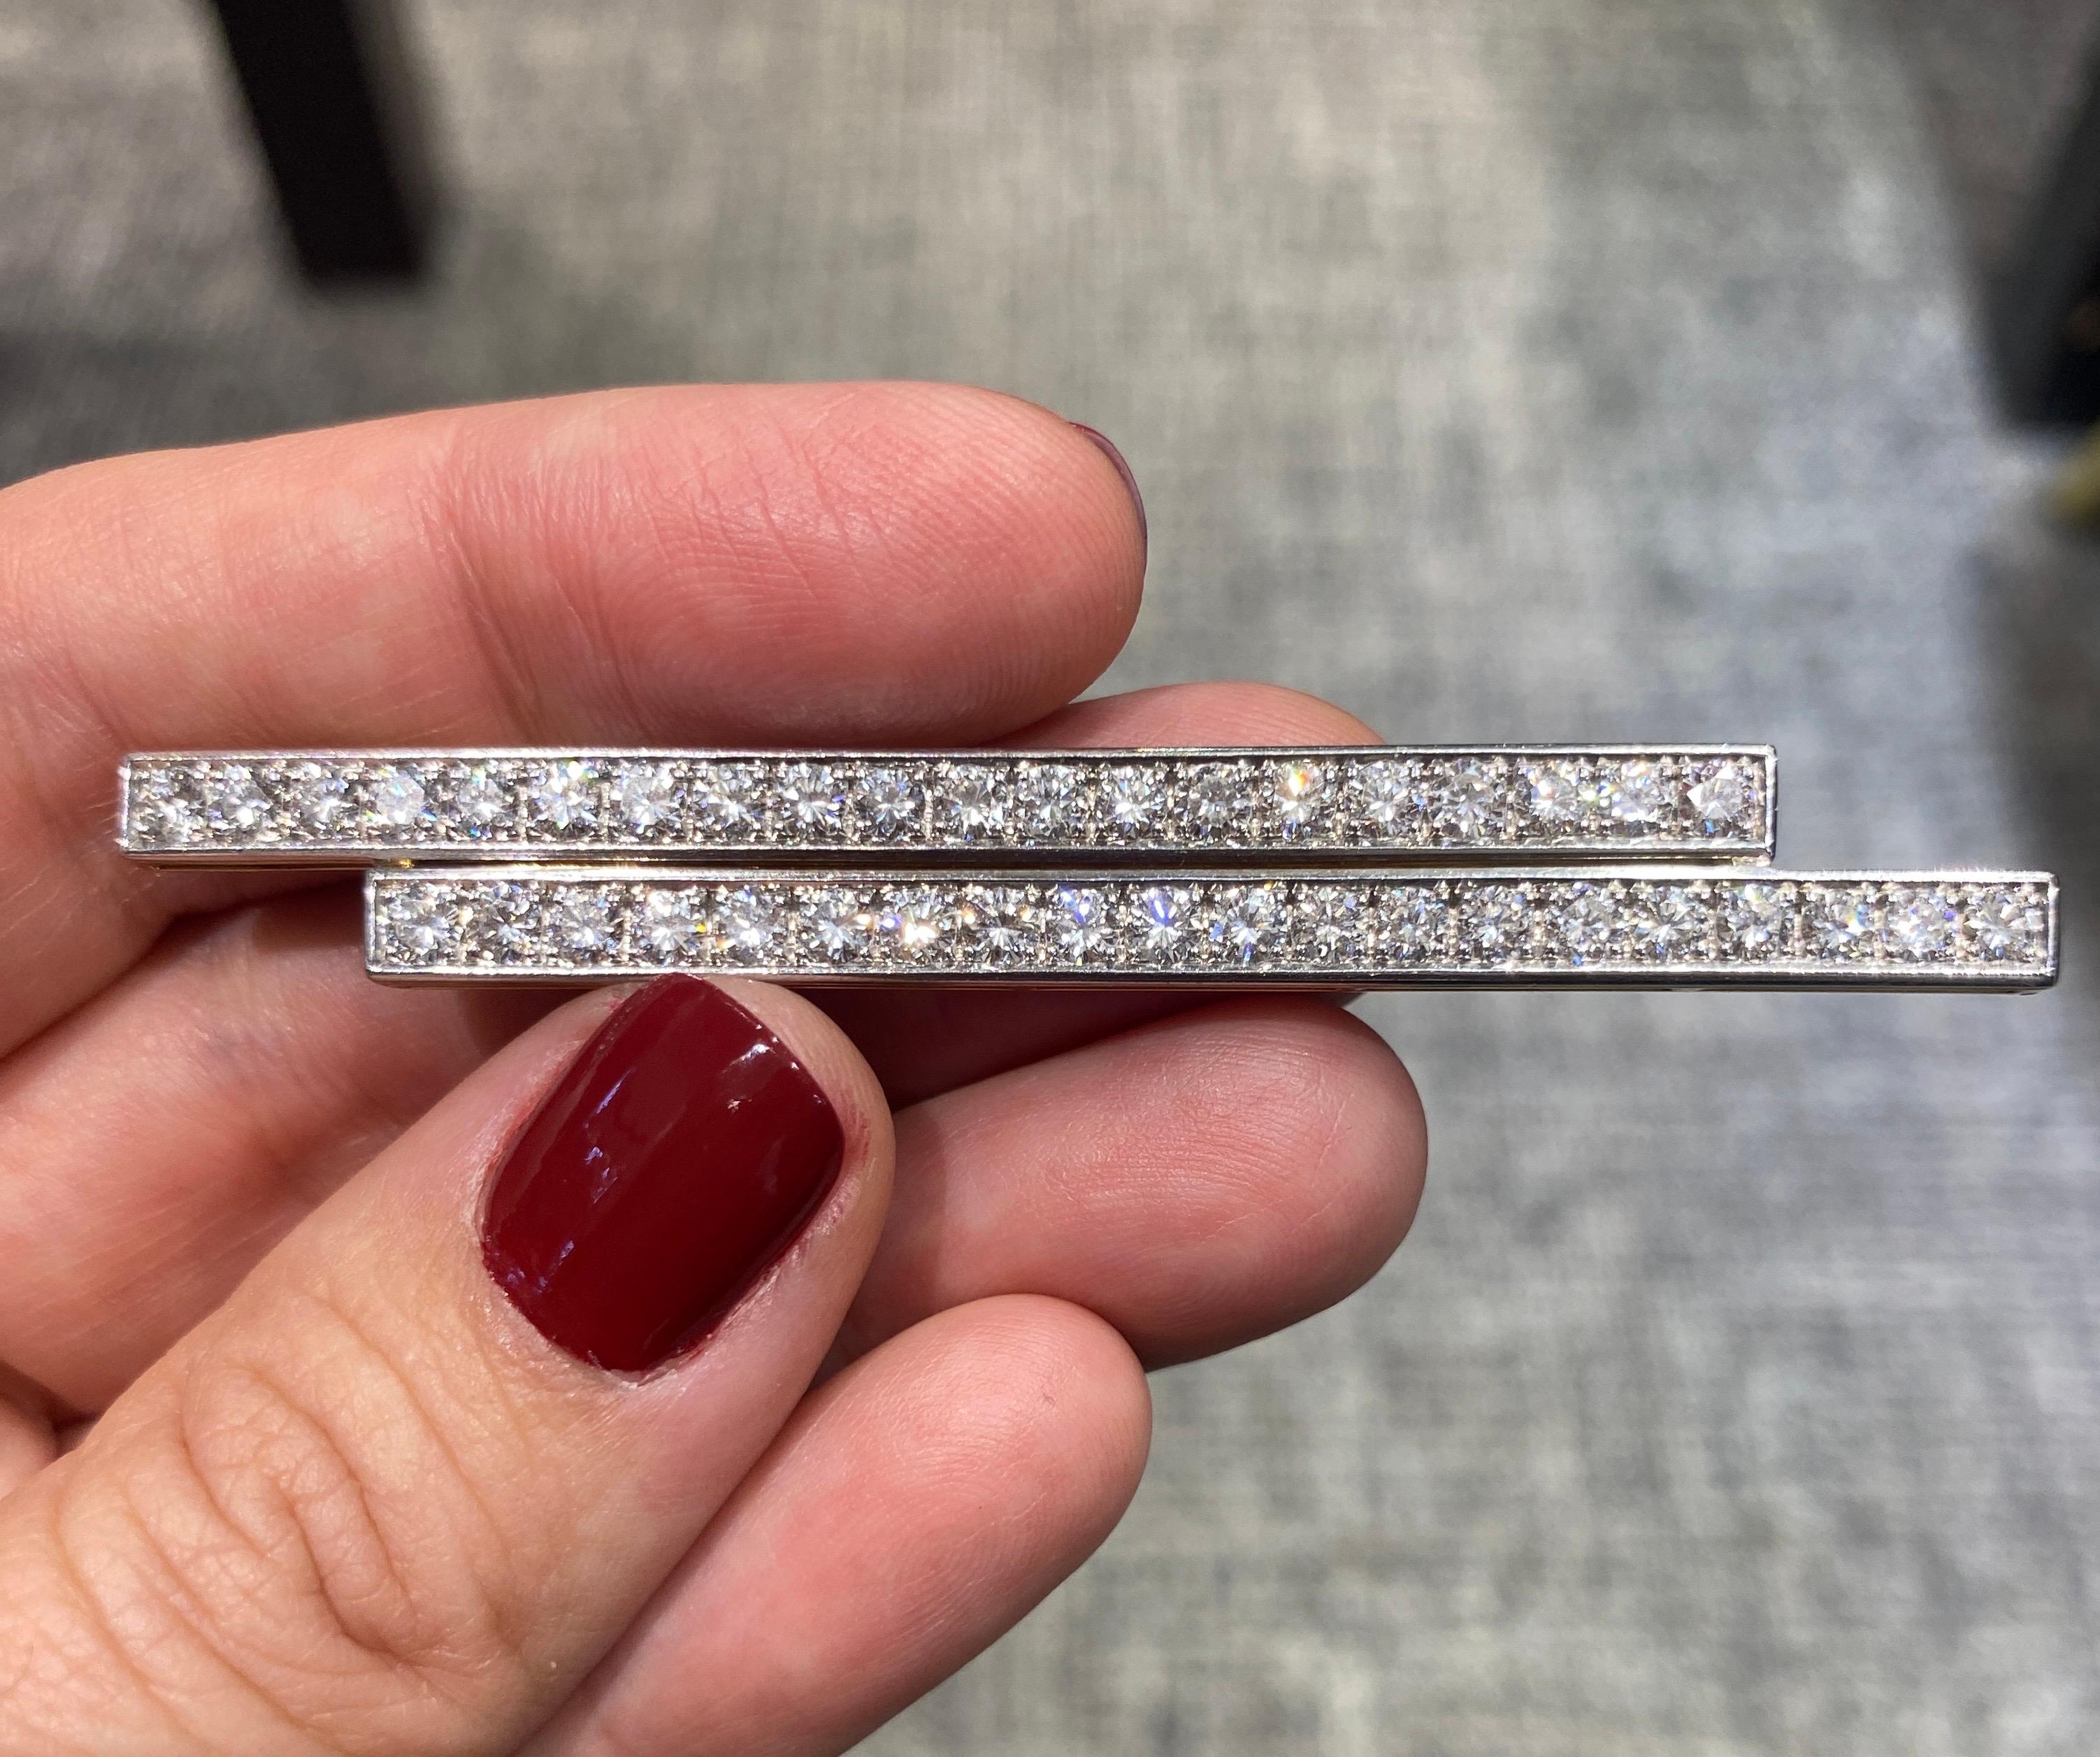 This strikingly elegant European made brooch from the 1950s consists of approximately 5.5 carats of diamonds set in platinum. The diamonds are round cut and F-G colour VS clarity. The base of the brooch is made of 18 carat gold.